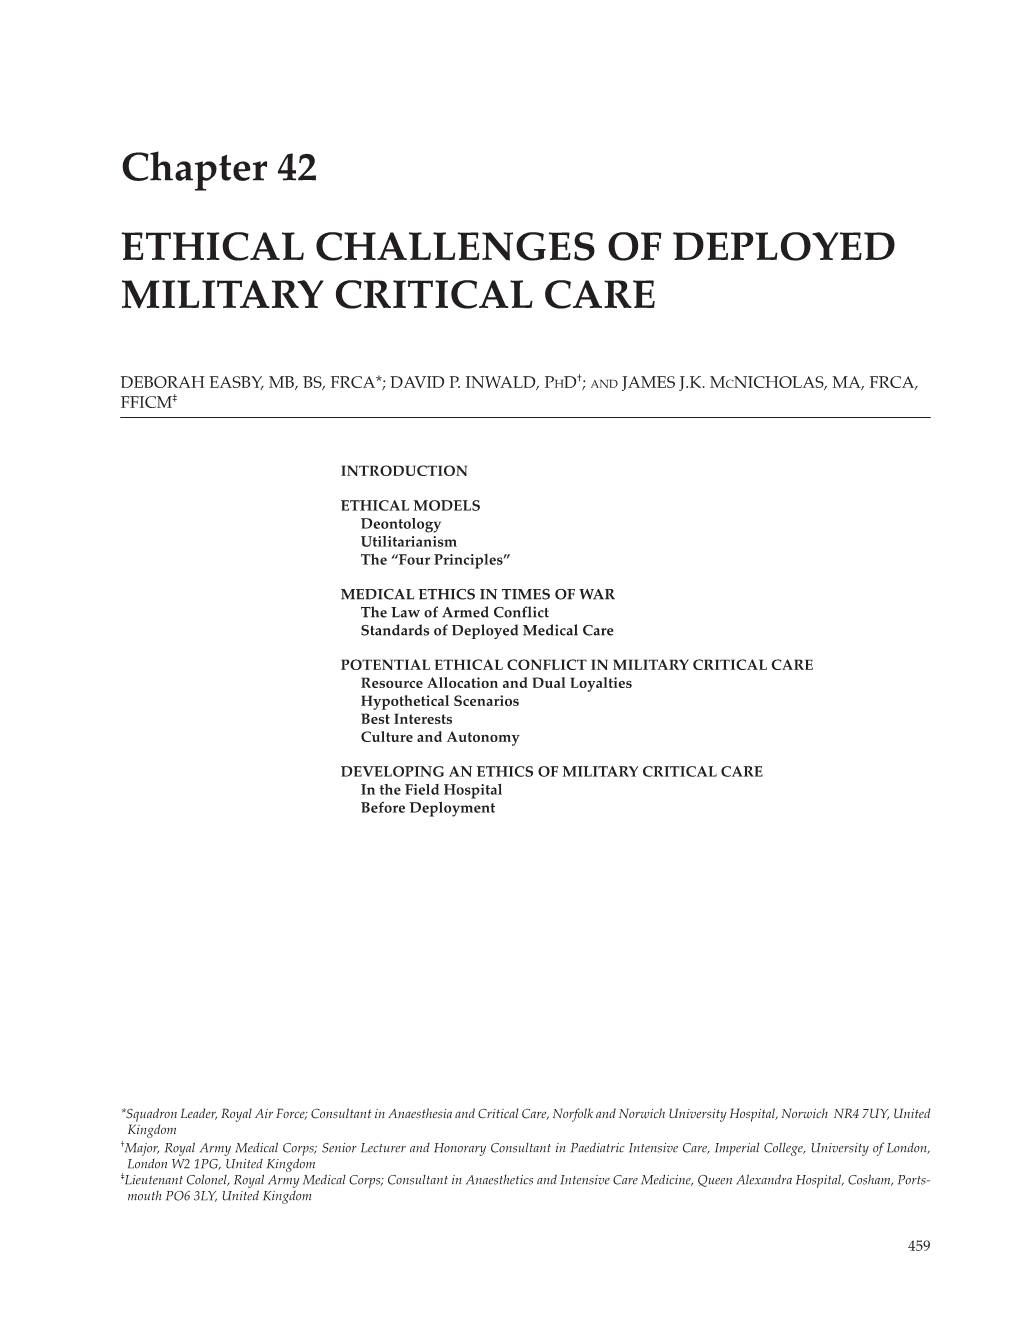 Chapter 42 ETHICAL CHALLENGES of DEPLOYED MILITARY CRITICAL CARE